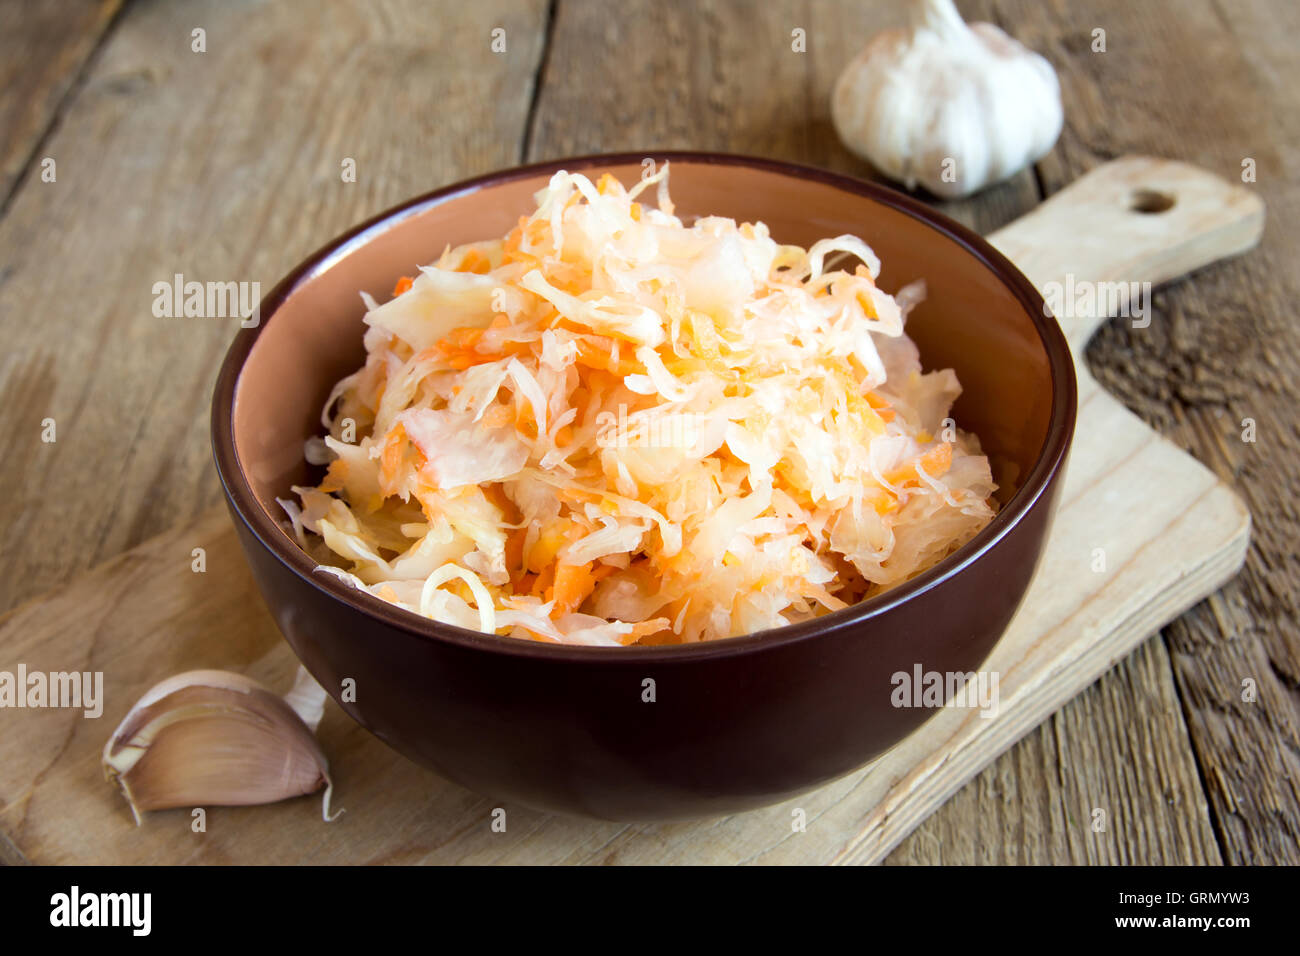 Sauerkraut in ceramic bowl on rustic wooden table with garlic, traditional rustic winter food Stock Photo